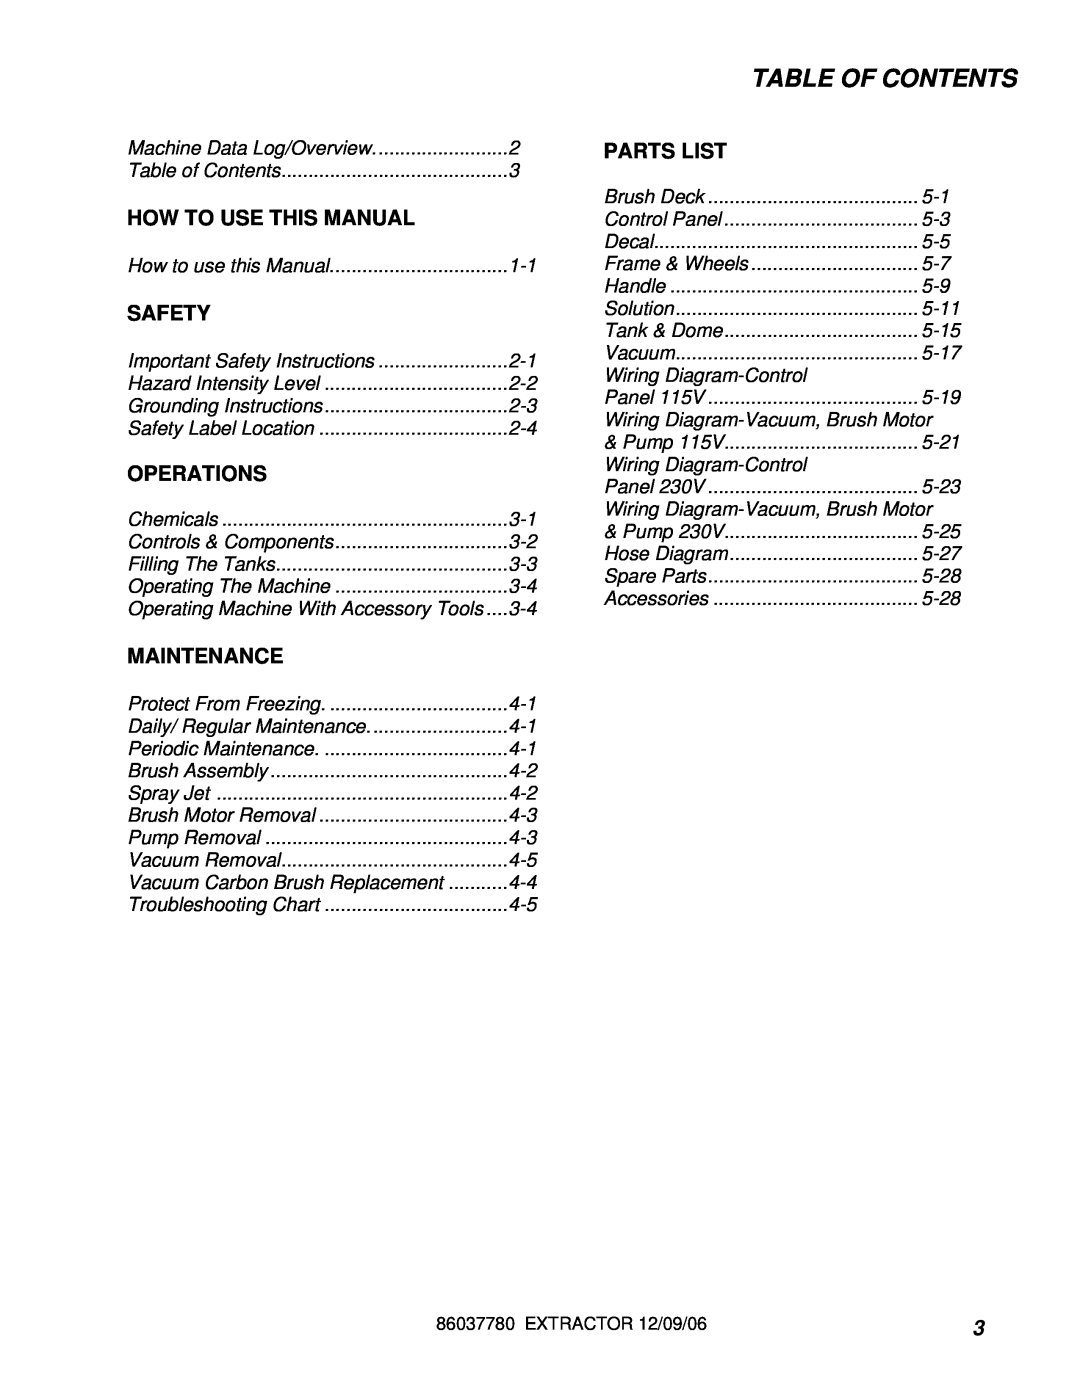 Windsor MPRO EU 10080400 manual How To Use This Manual, Safety, Operations, Maintenance, Parts List, Table Of Contents 